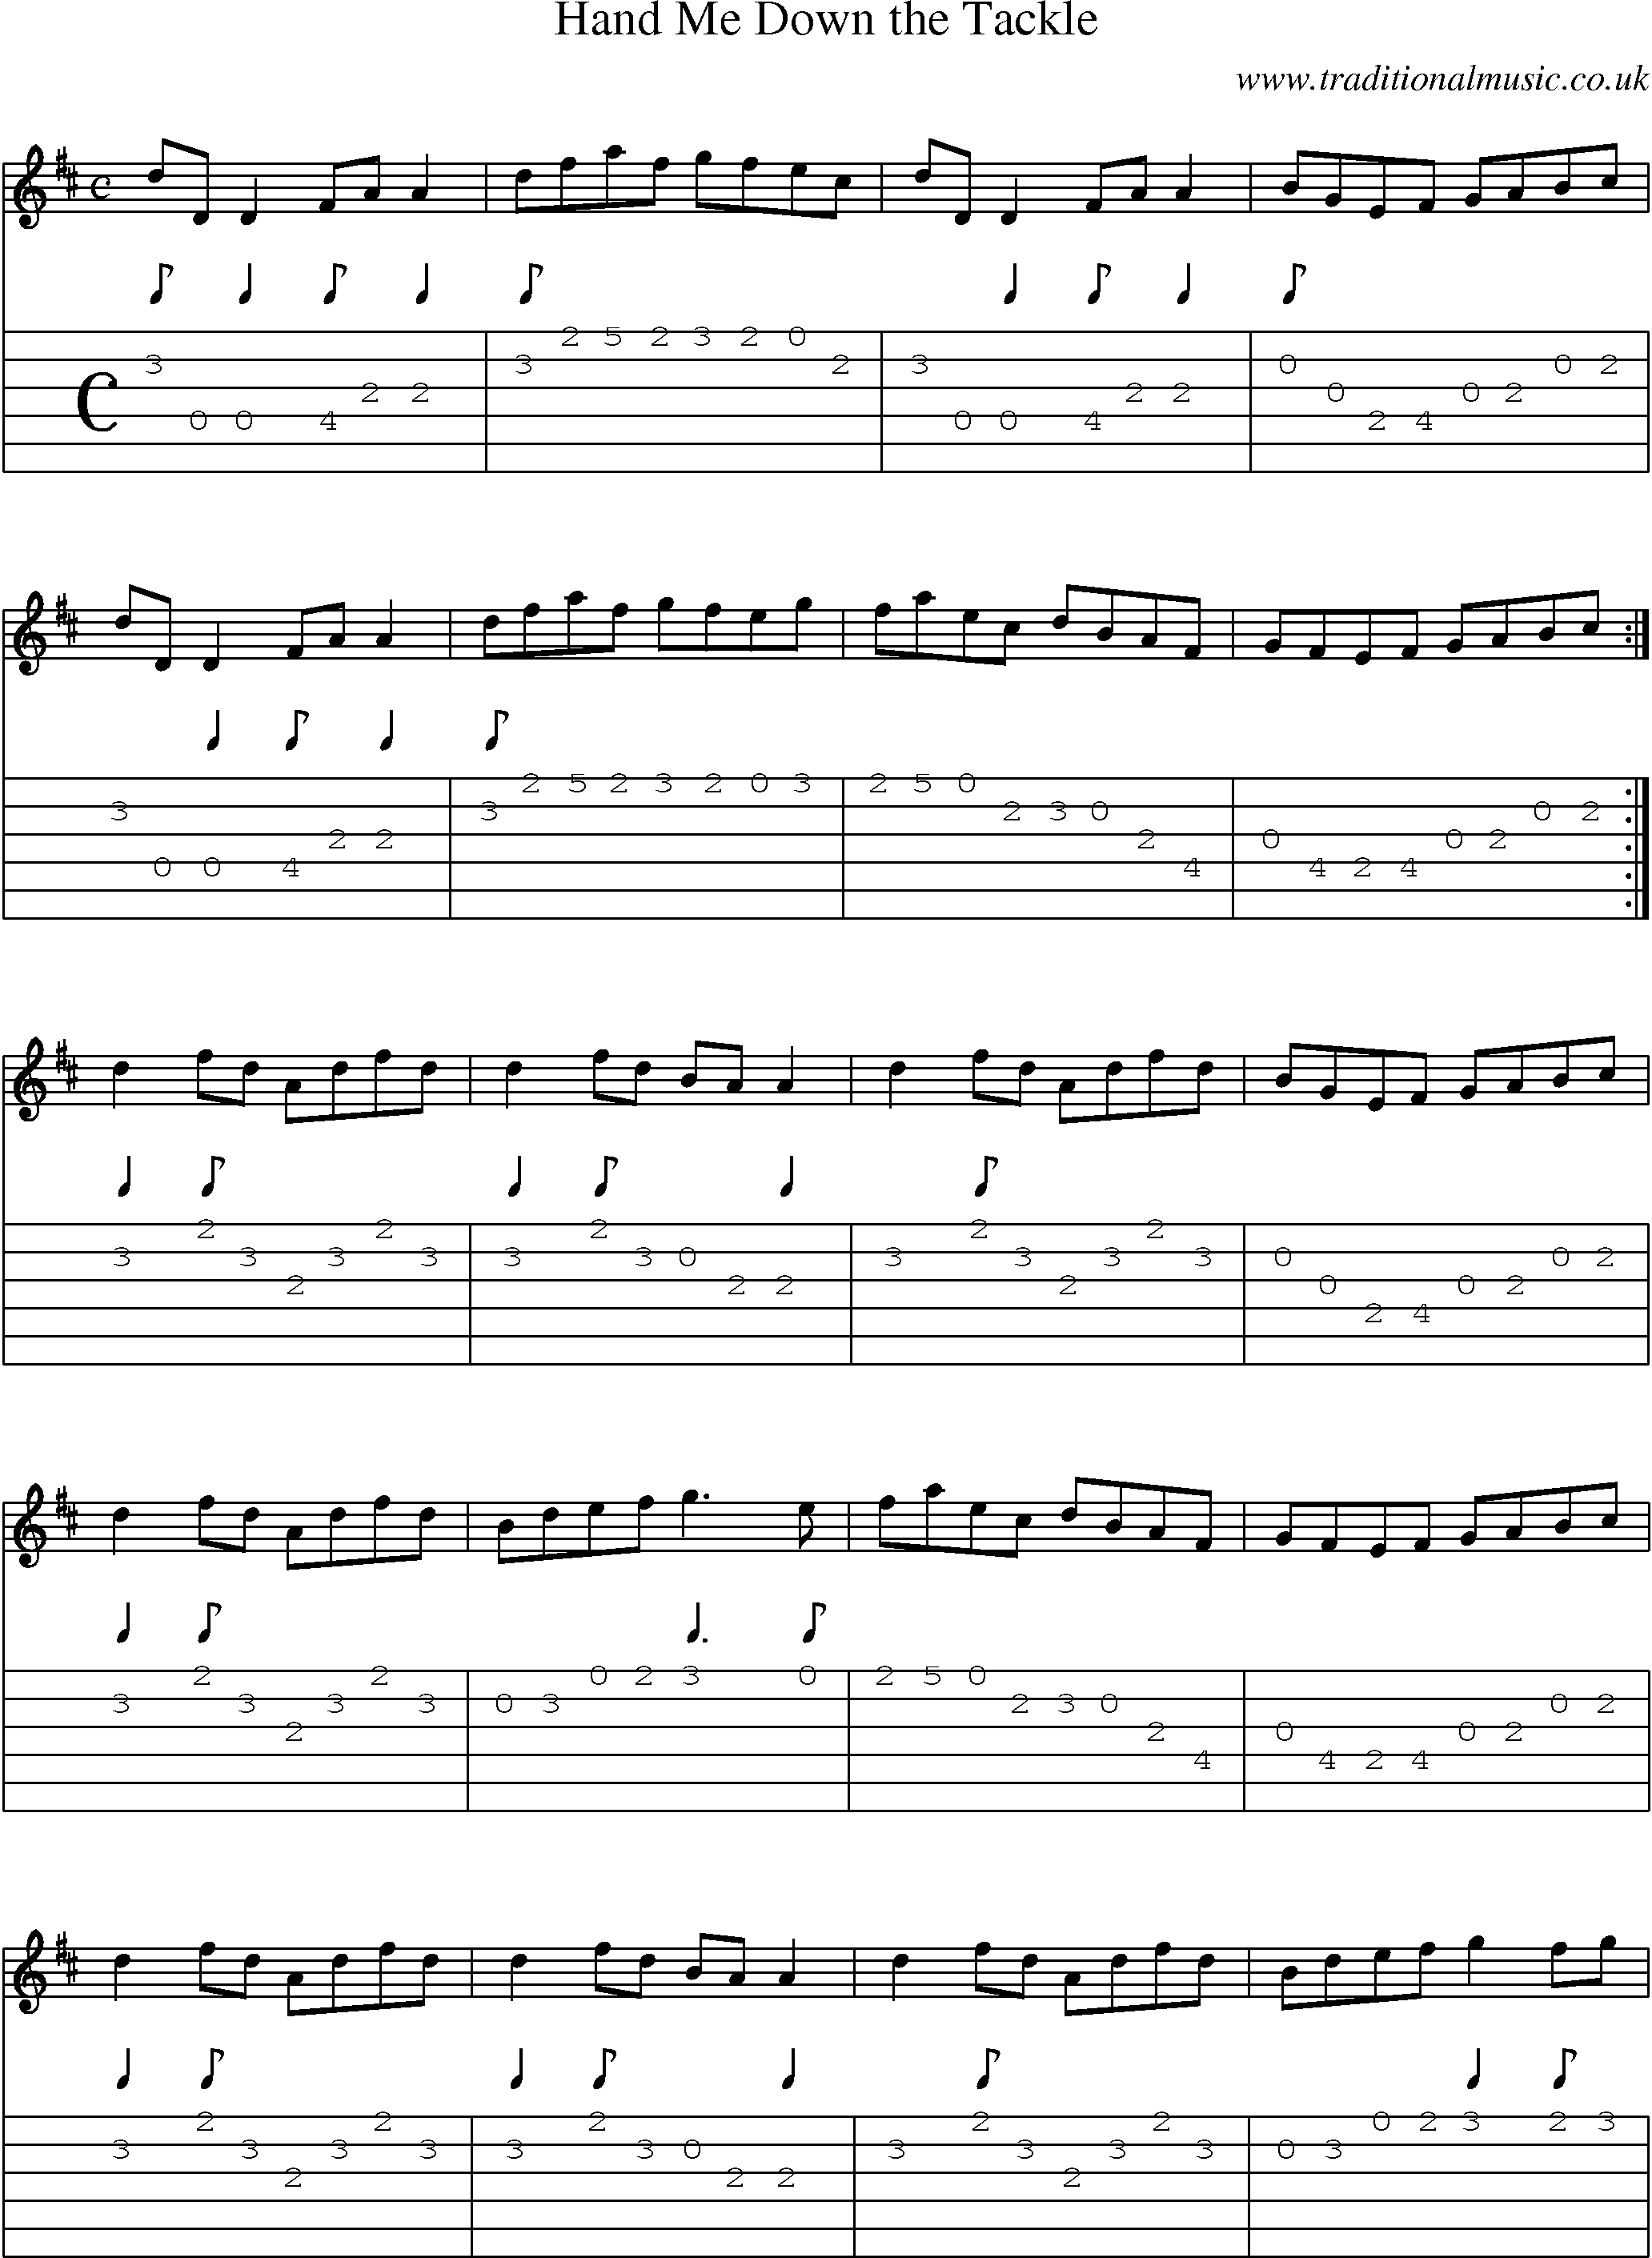 Music Score and Guitar Tabs for Hand Me Down Tackle